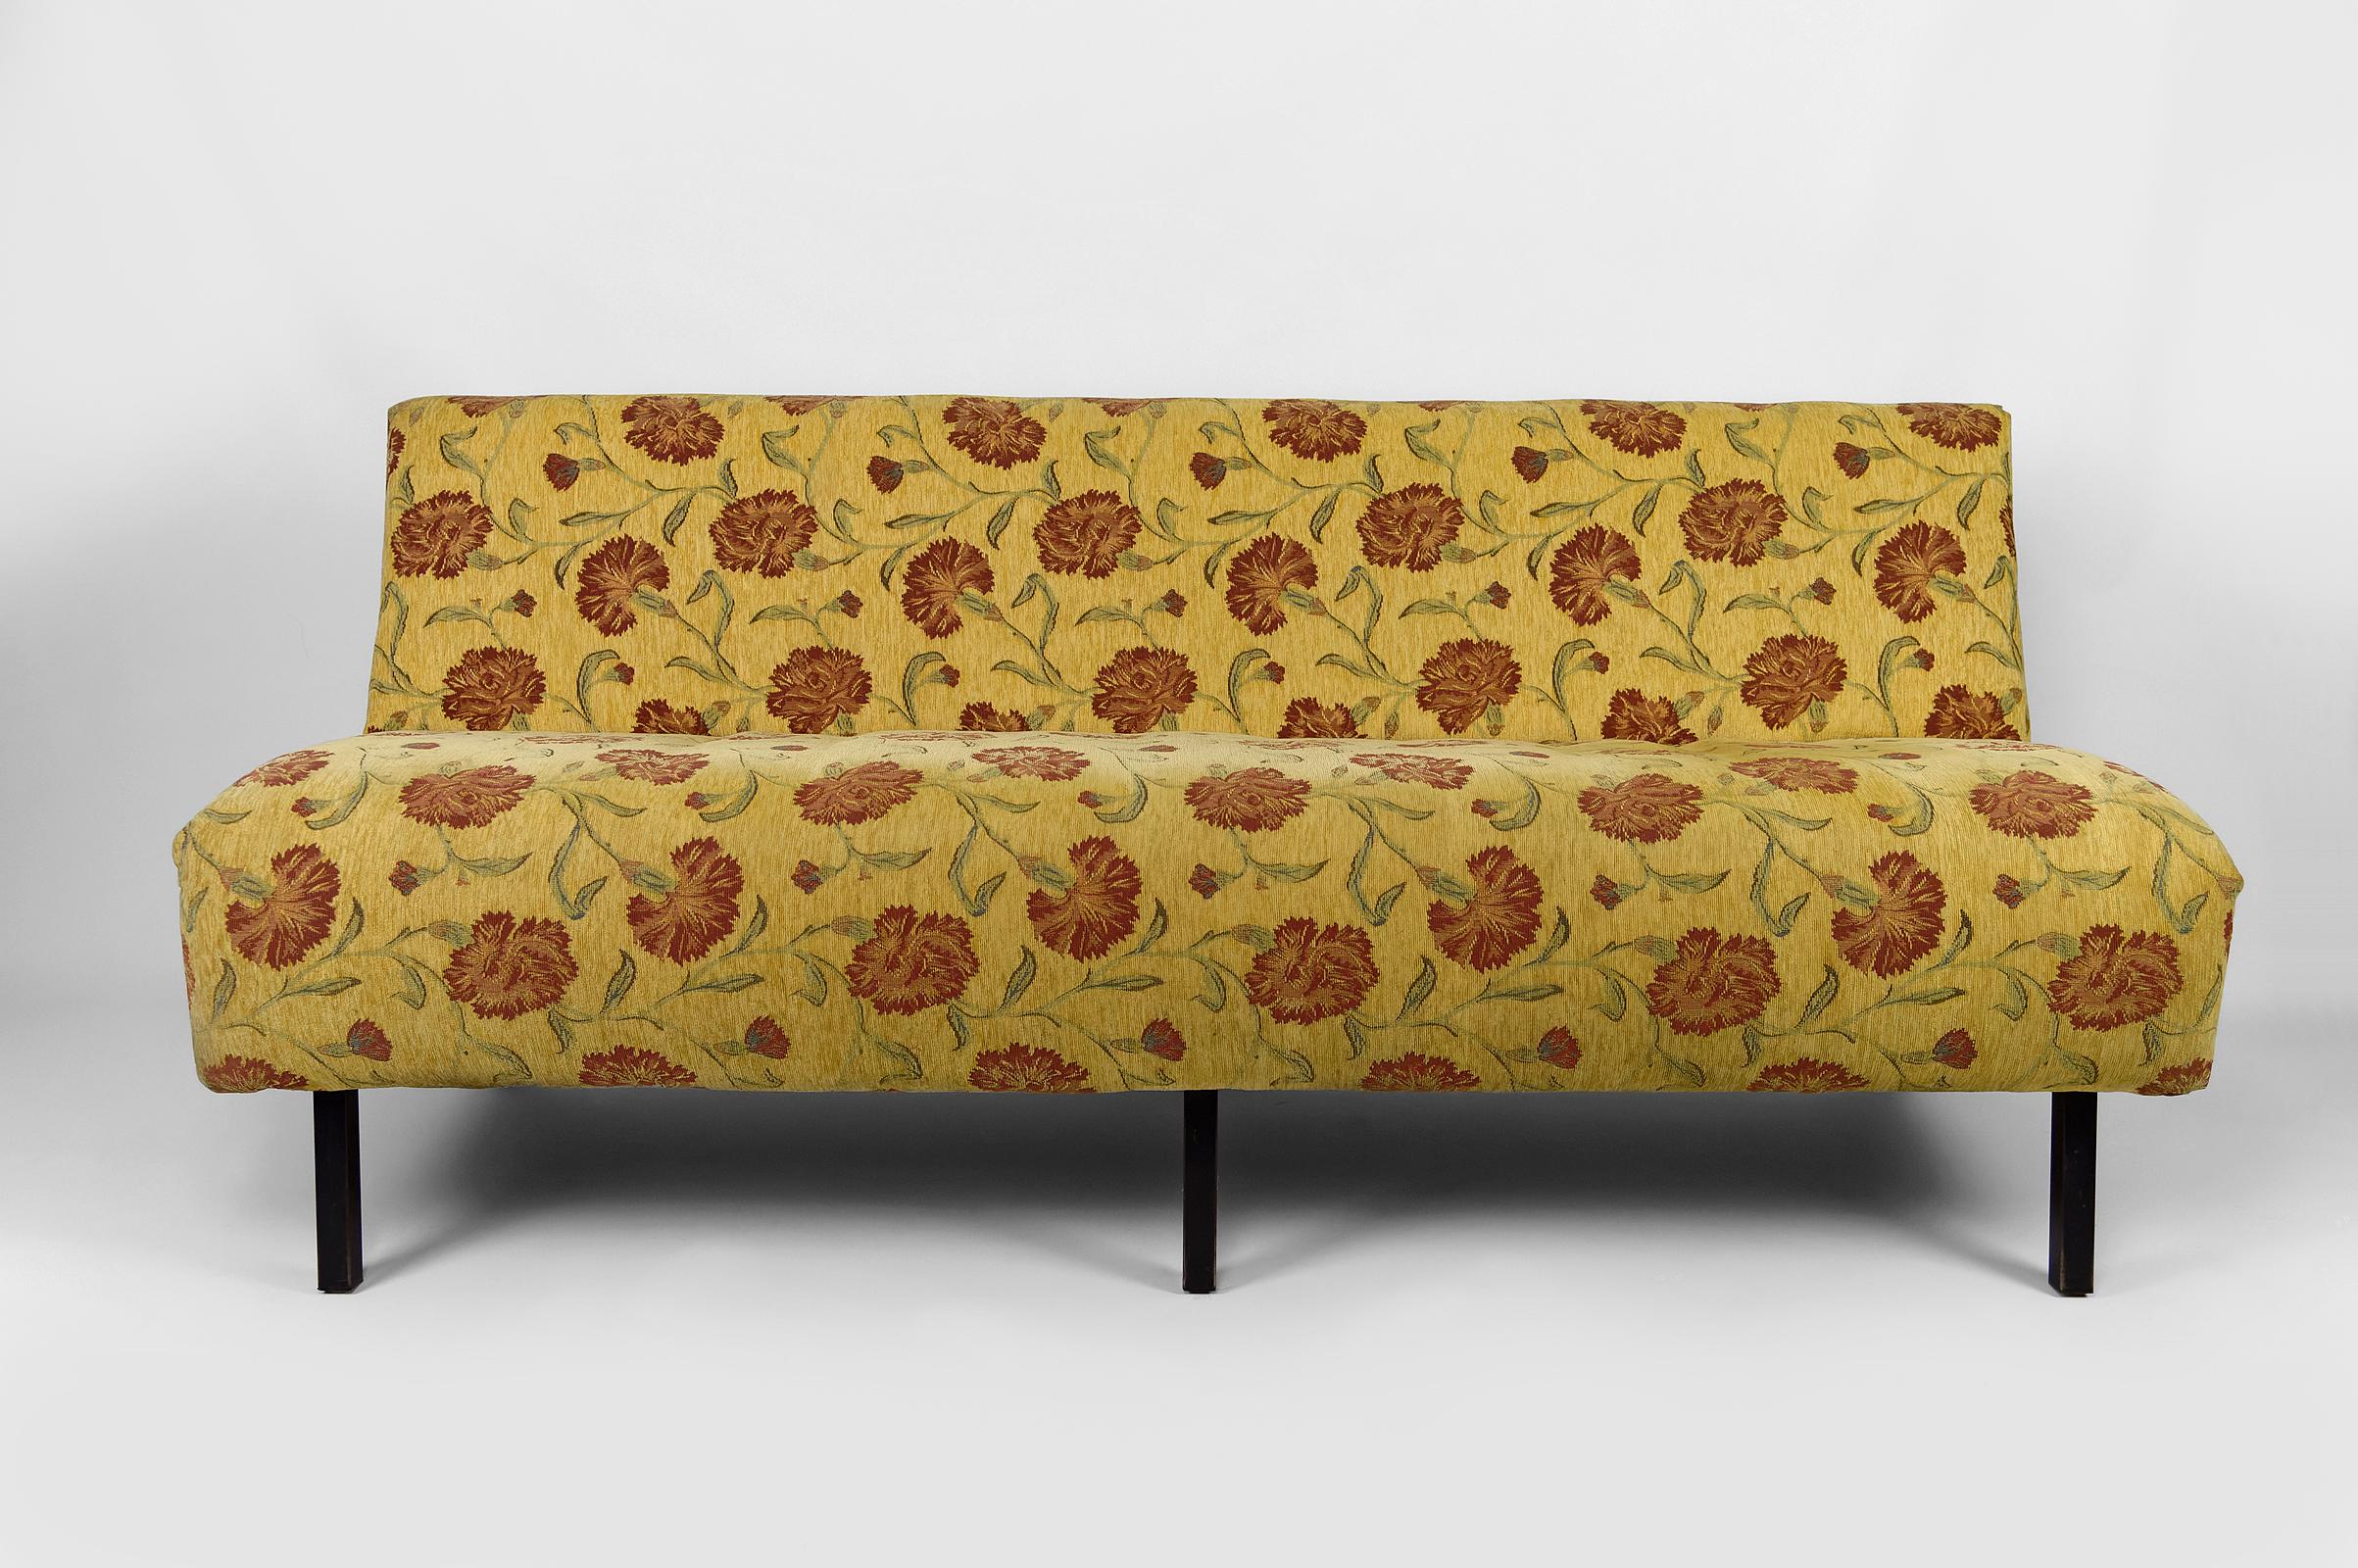 Bohemian Vintage Boho sofa with yellow and red floral fabric, France, Circa 1960 For Sale